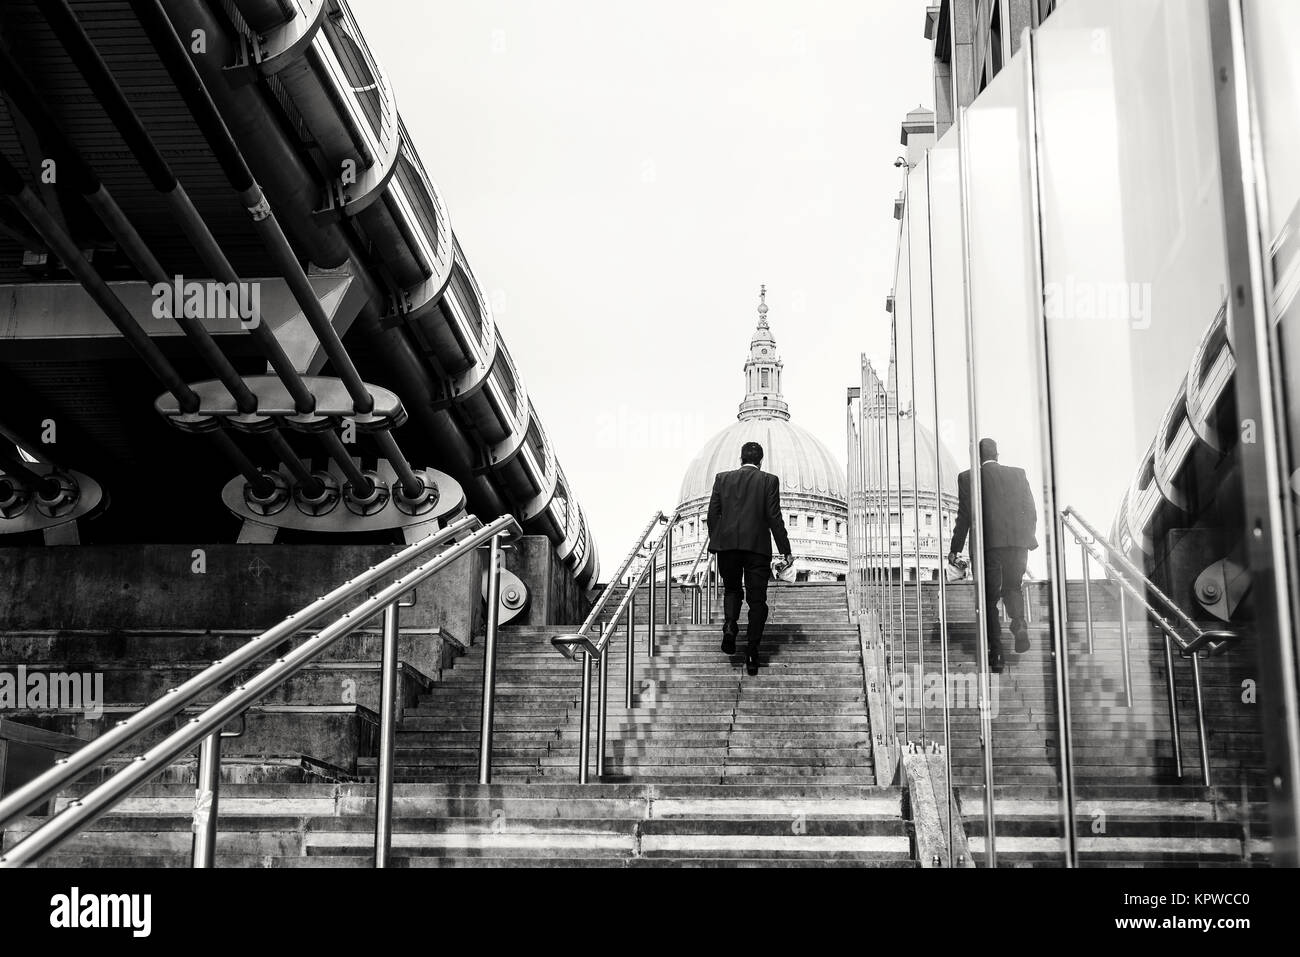 Man in business suit walking up steps towards St Paul’s Cathedral in London England in black and white Stock Photo